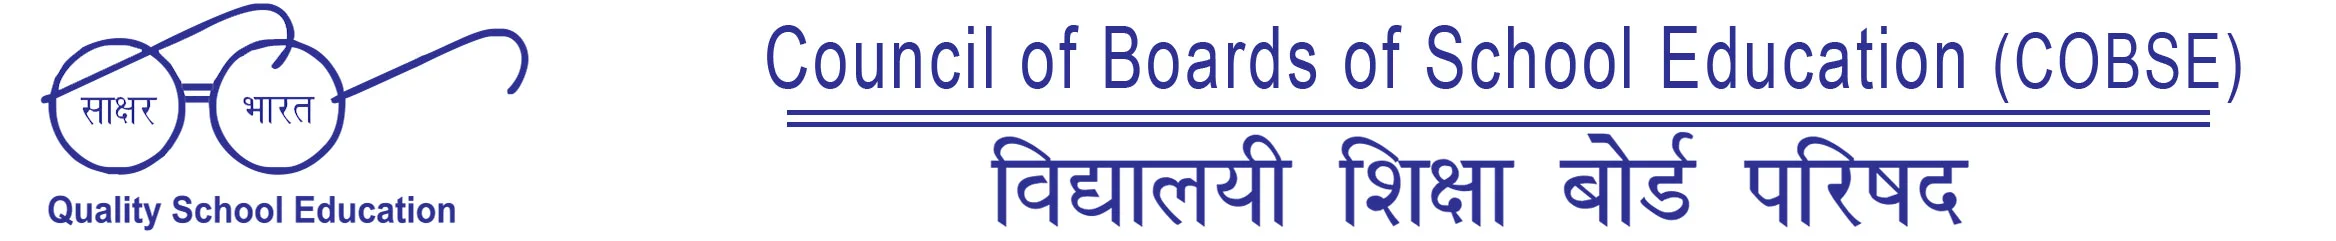 COBSE is consortium of all Boards of School Education in India